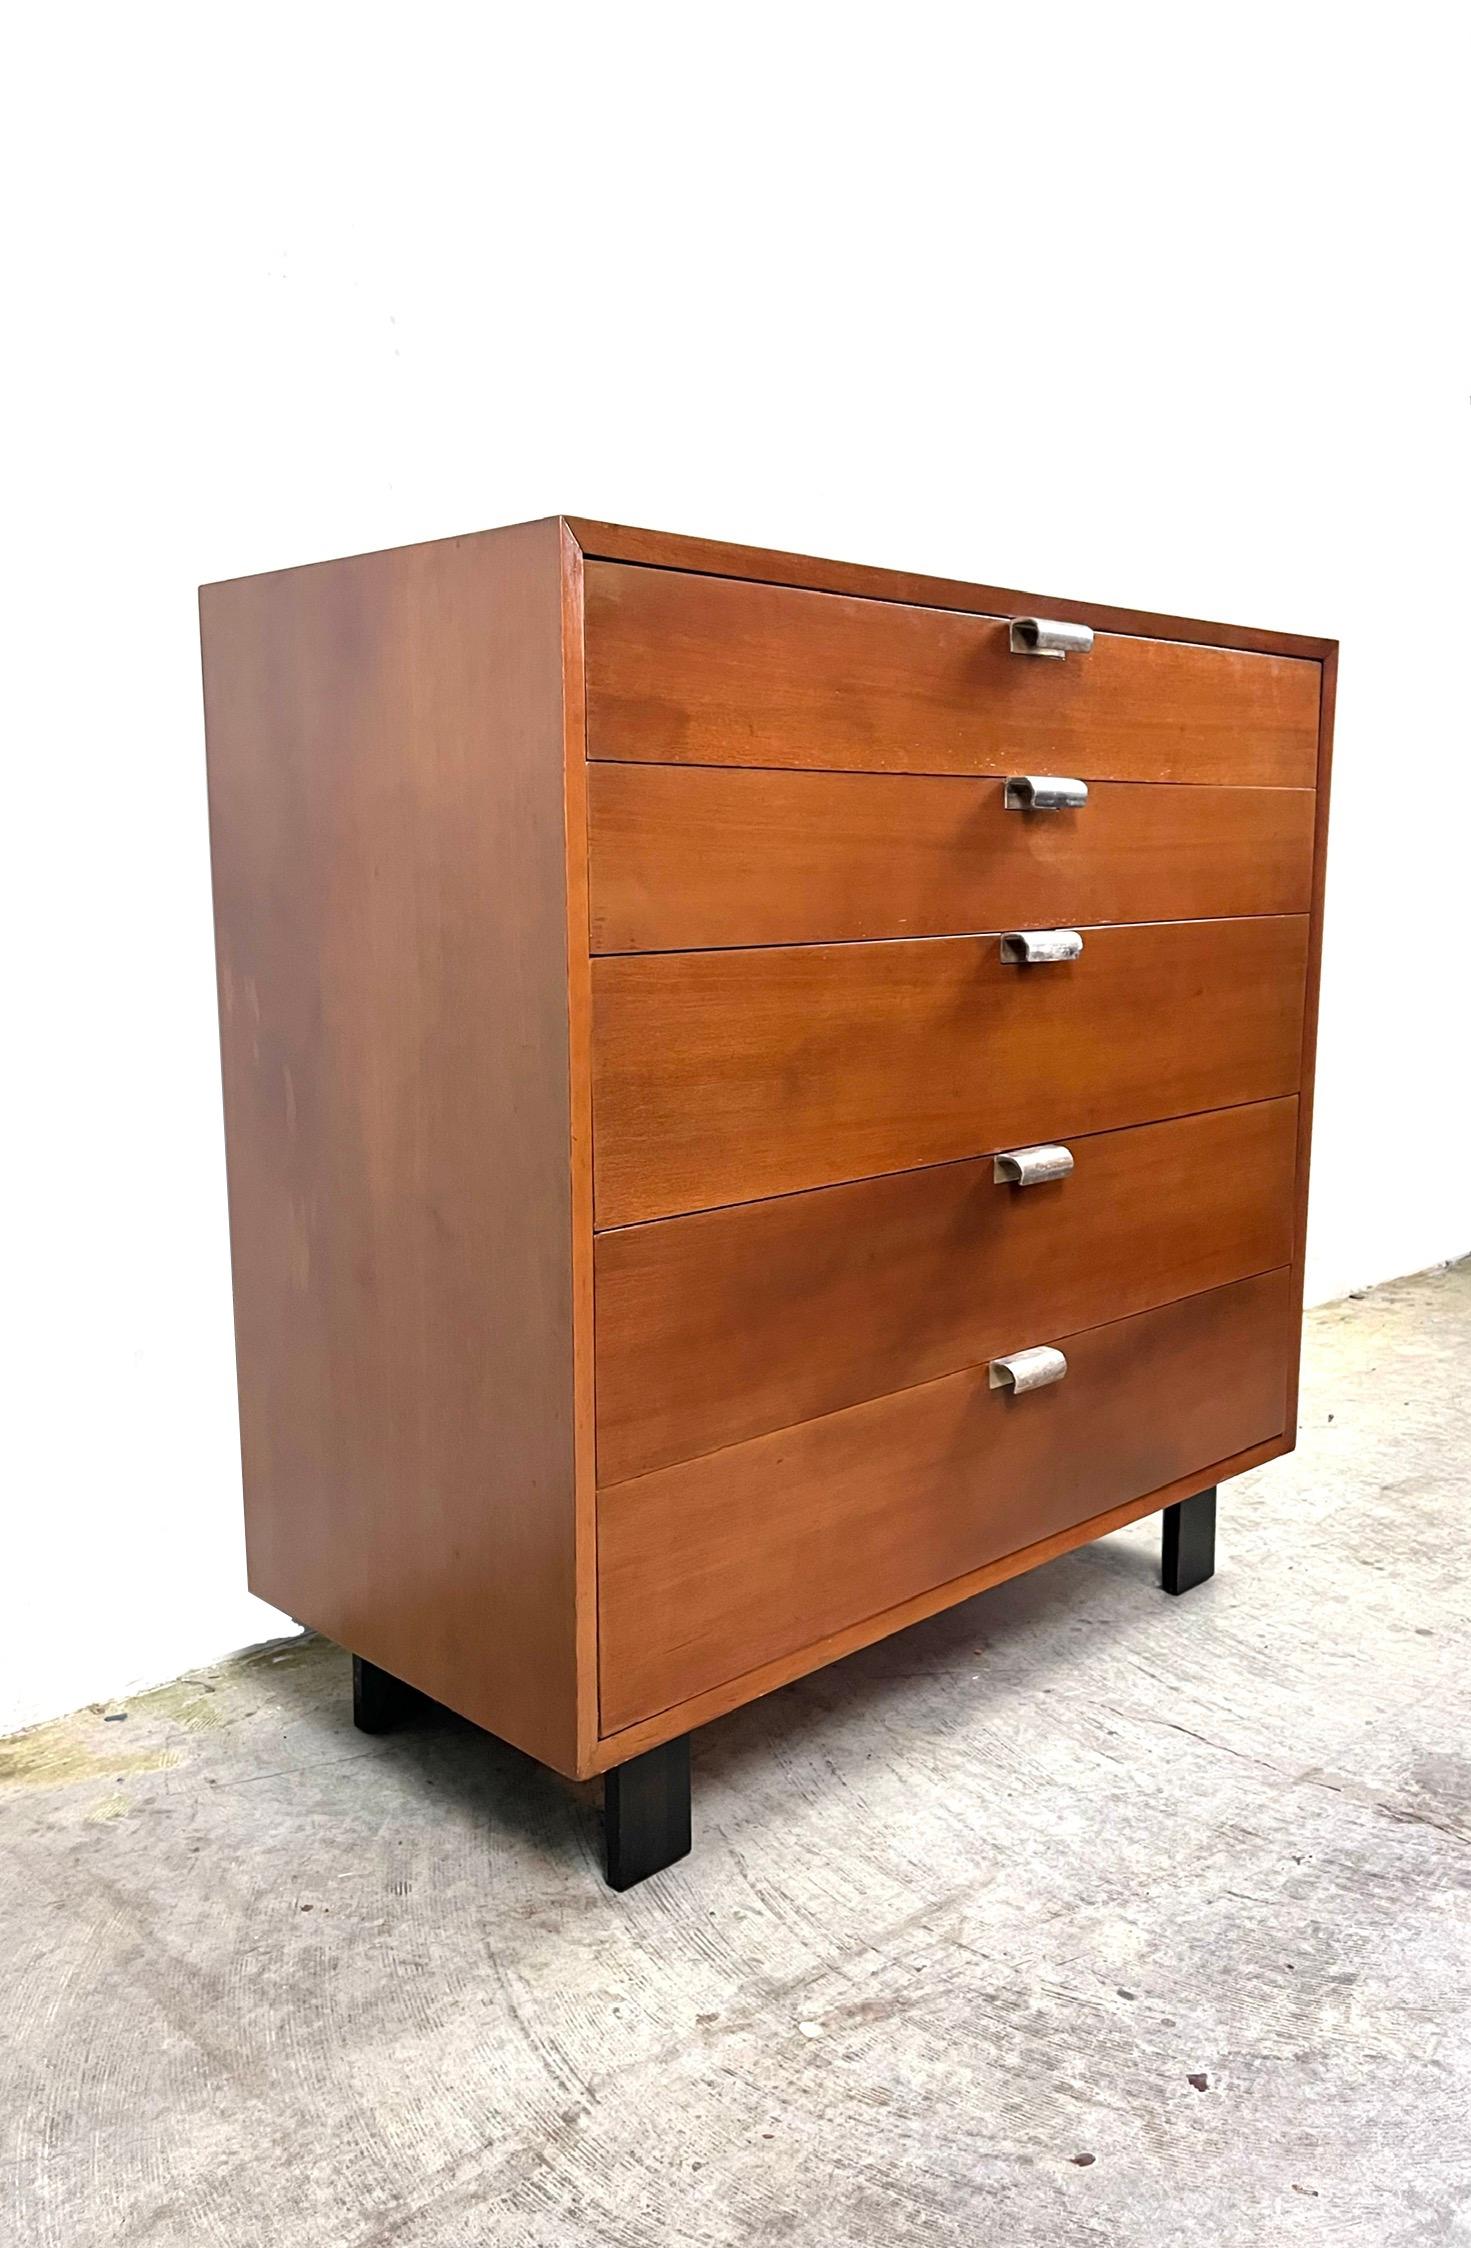 Highboy dresser by George Nelson for Herman Miller, c.1950’s. This five-drawer dresser features a walnut frame with sculpted original chrome plated metal pulls. Top drawer features separations for smaller belongings. Rests on Ebonized wooden black